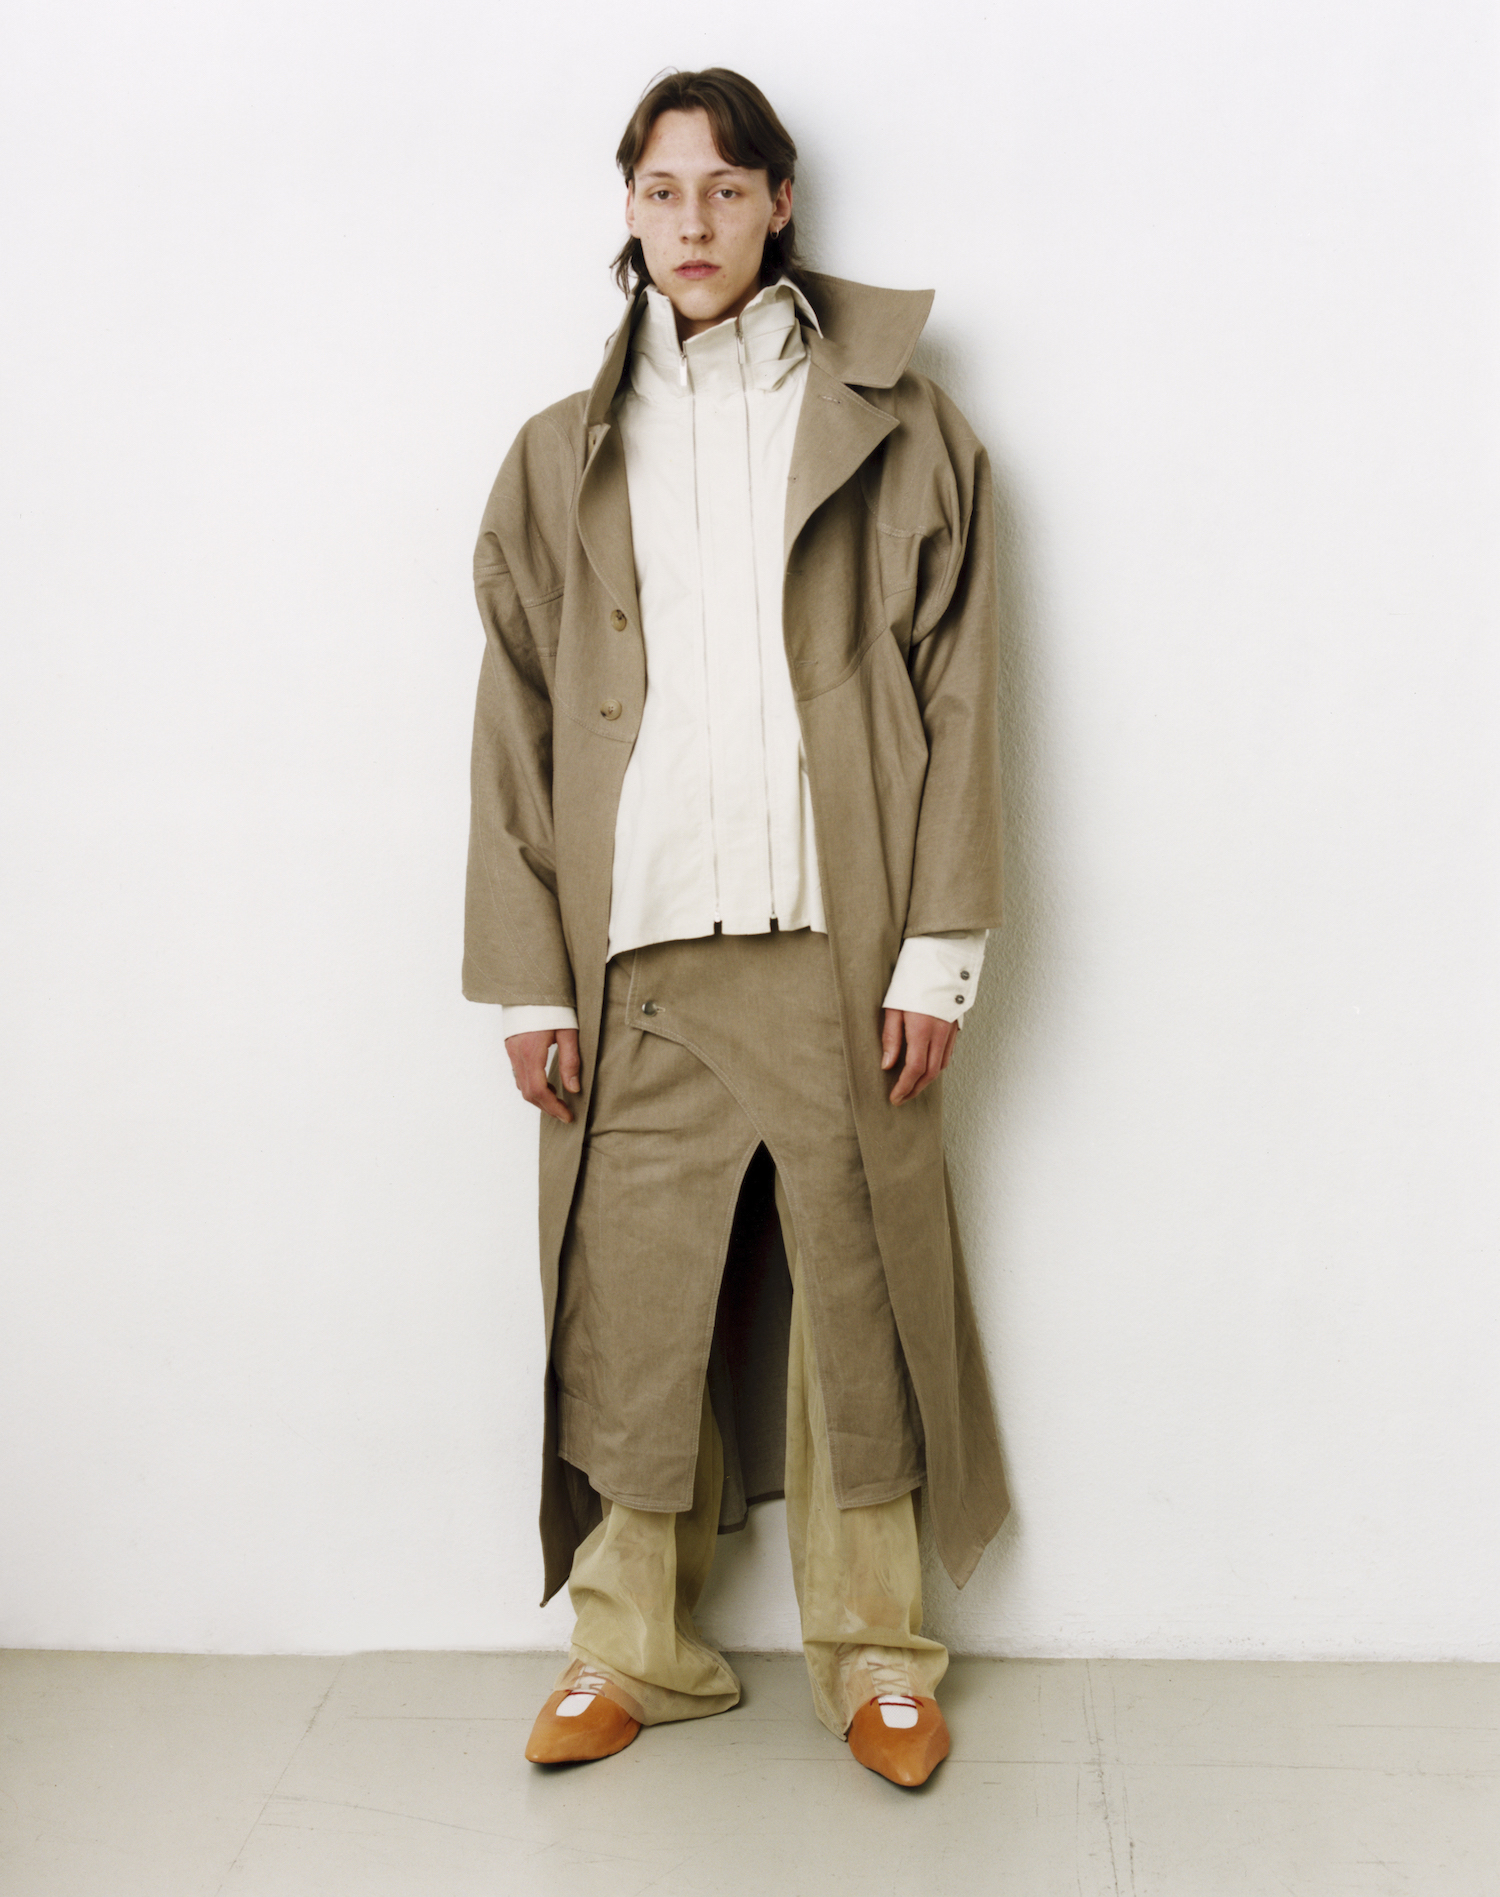 Lueder is the young London brand making ‘mental armour’ for testing ...